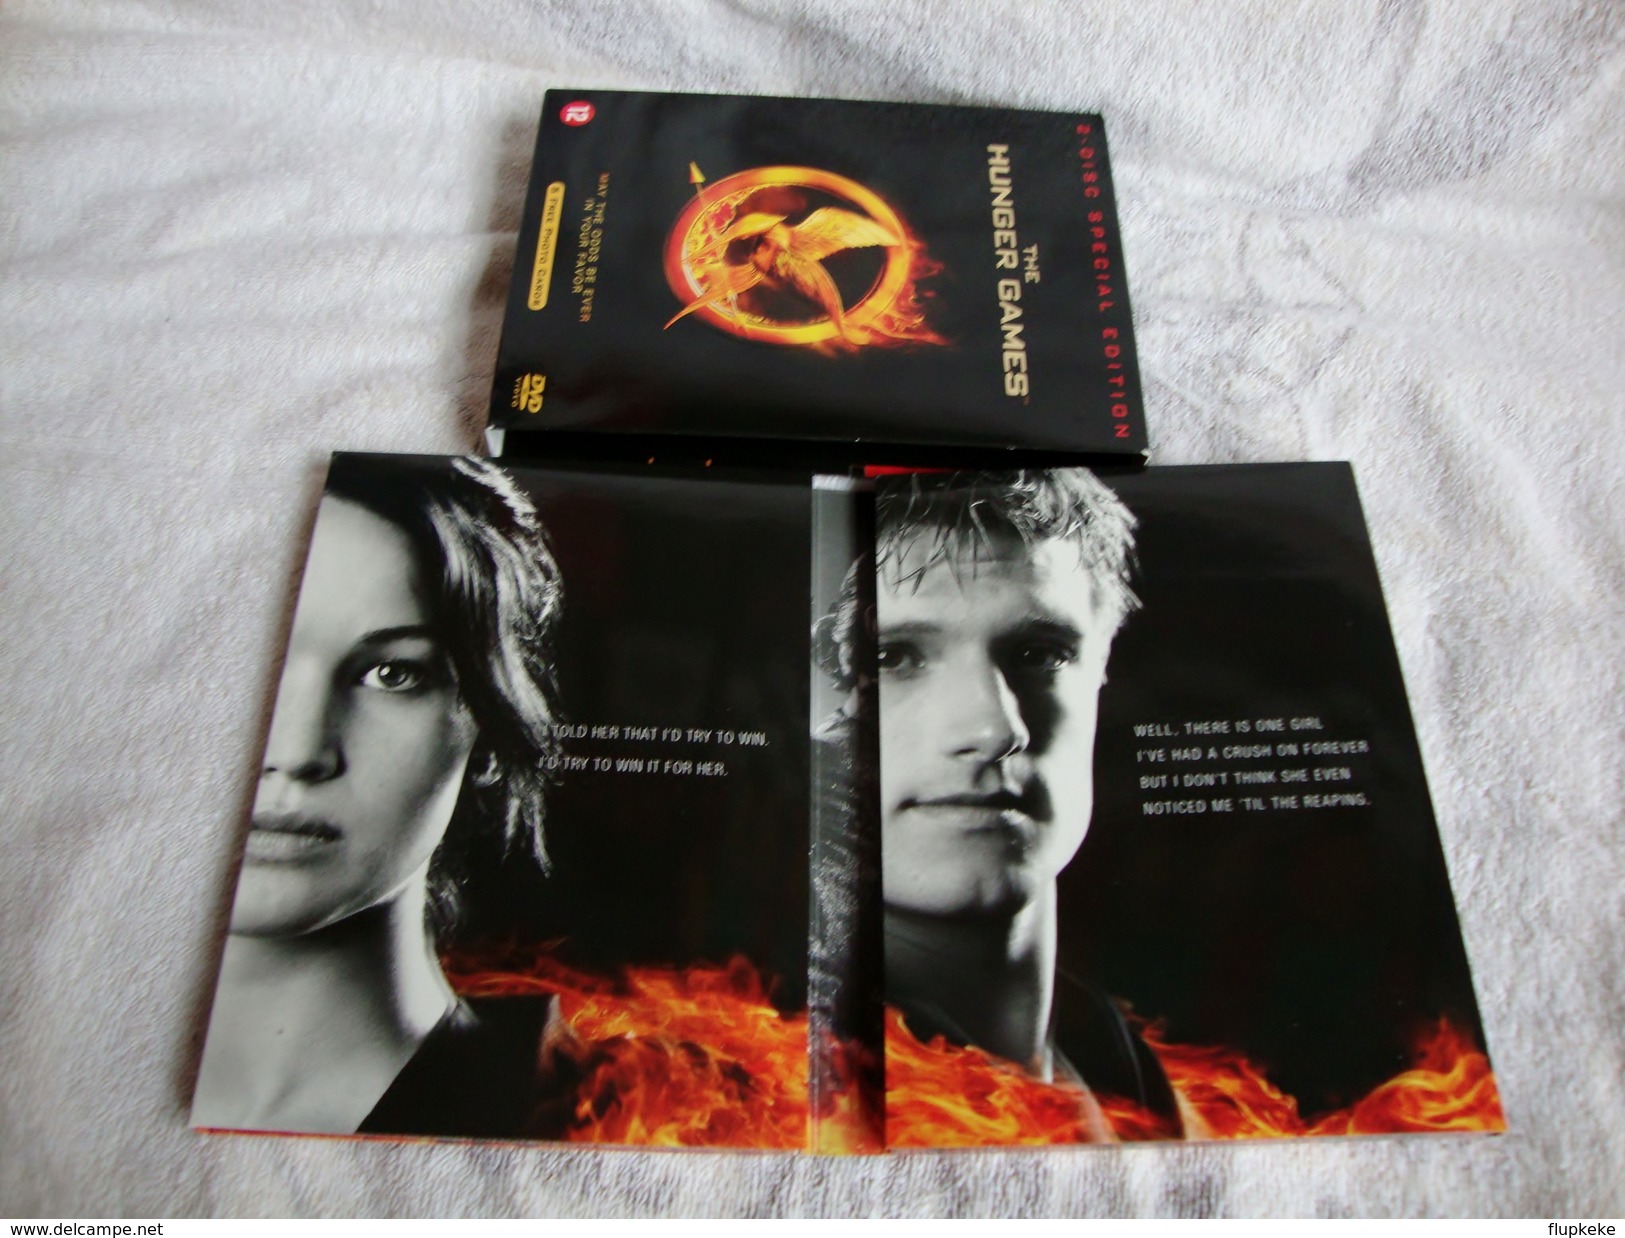 Dvd Zone 2 Hunger Games (2012) 2 DVD Édition Spéciale Collector The Hunger Games Vf+Vostfr - Sci-Fi, Fantasy